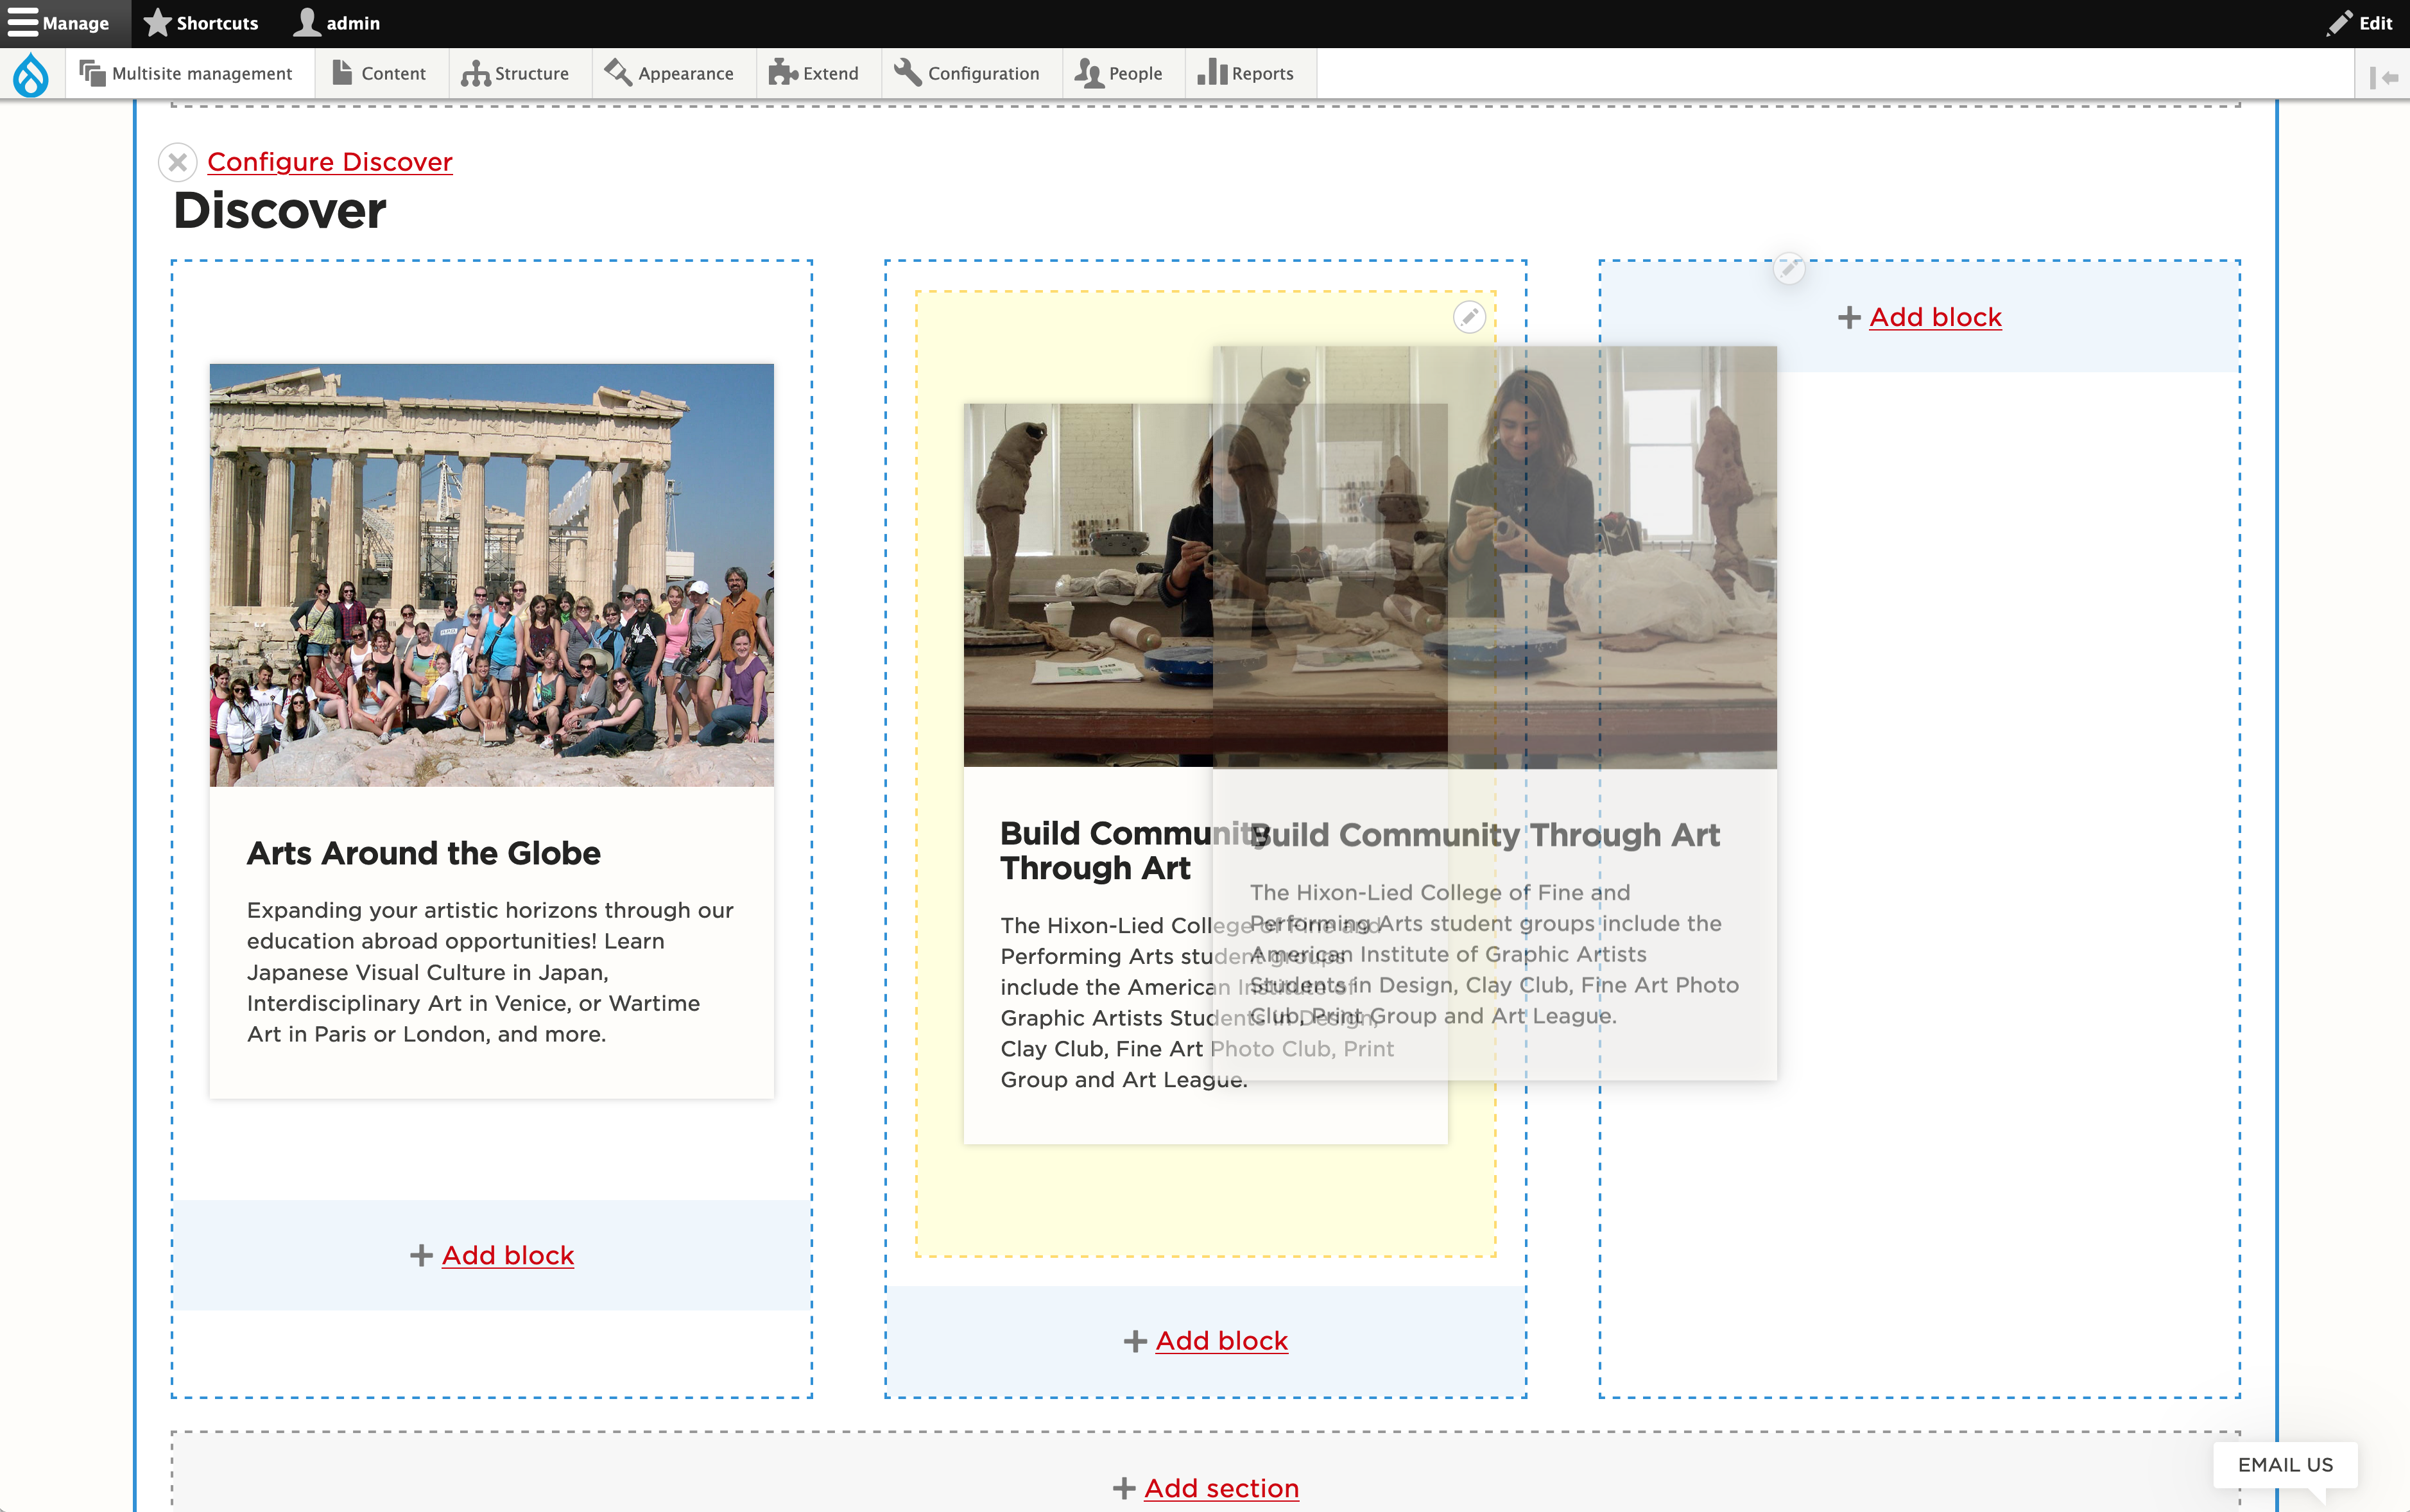 The Layout Builder interface in action, showing a photo being moved via drag-and-drop.